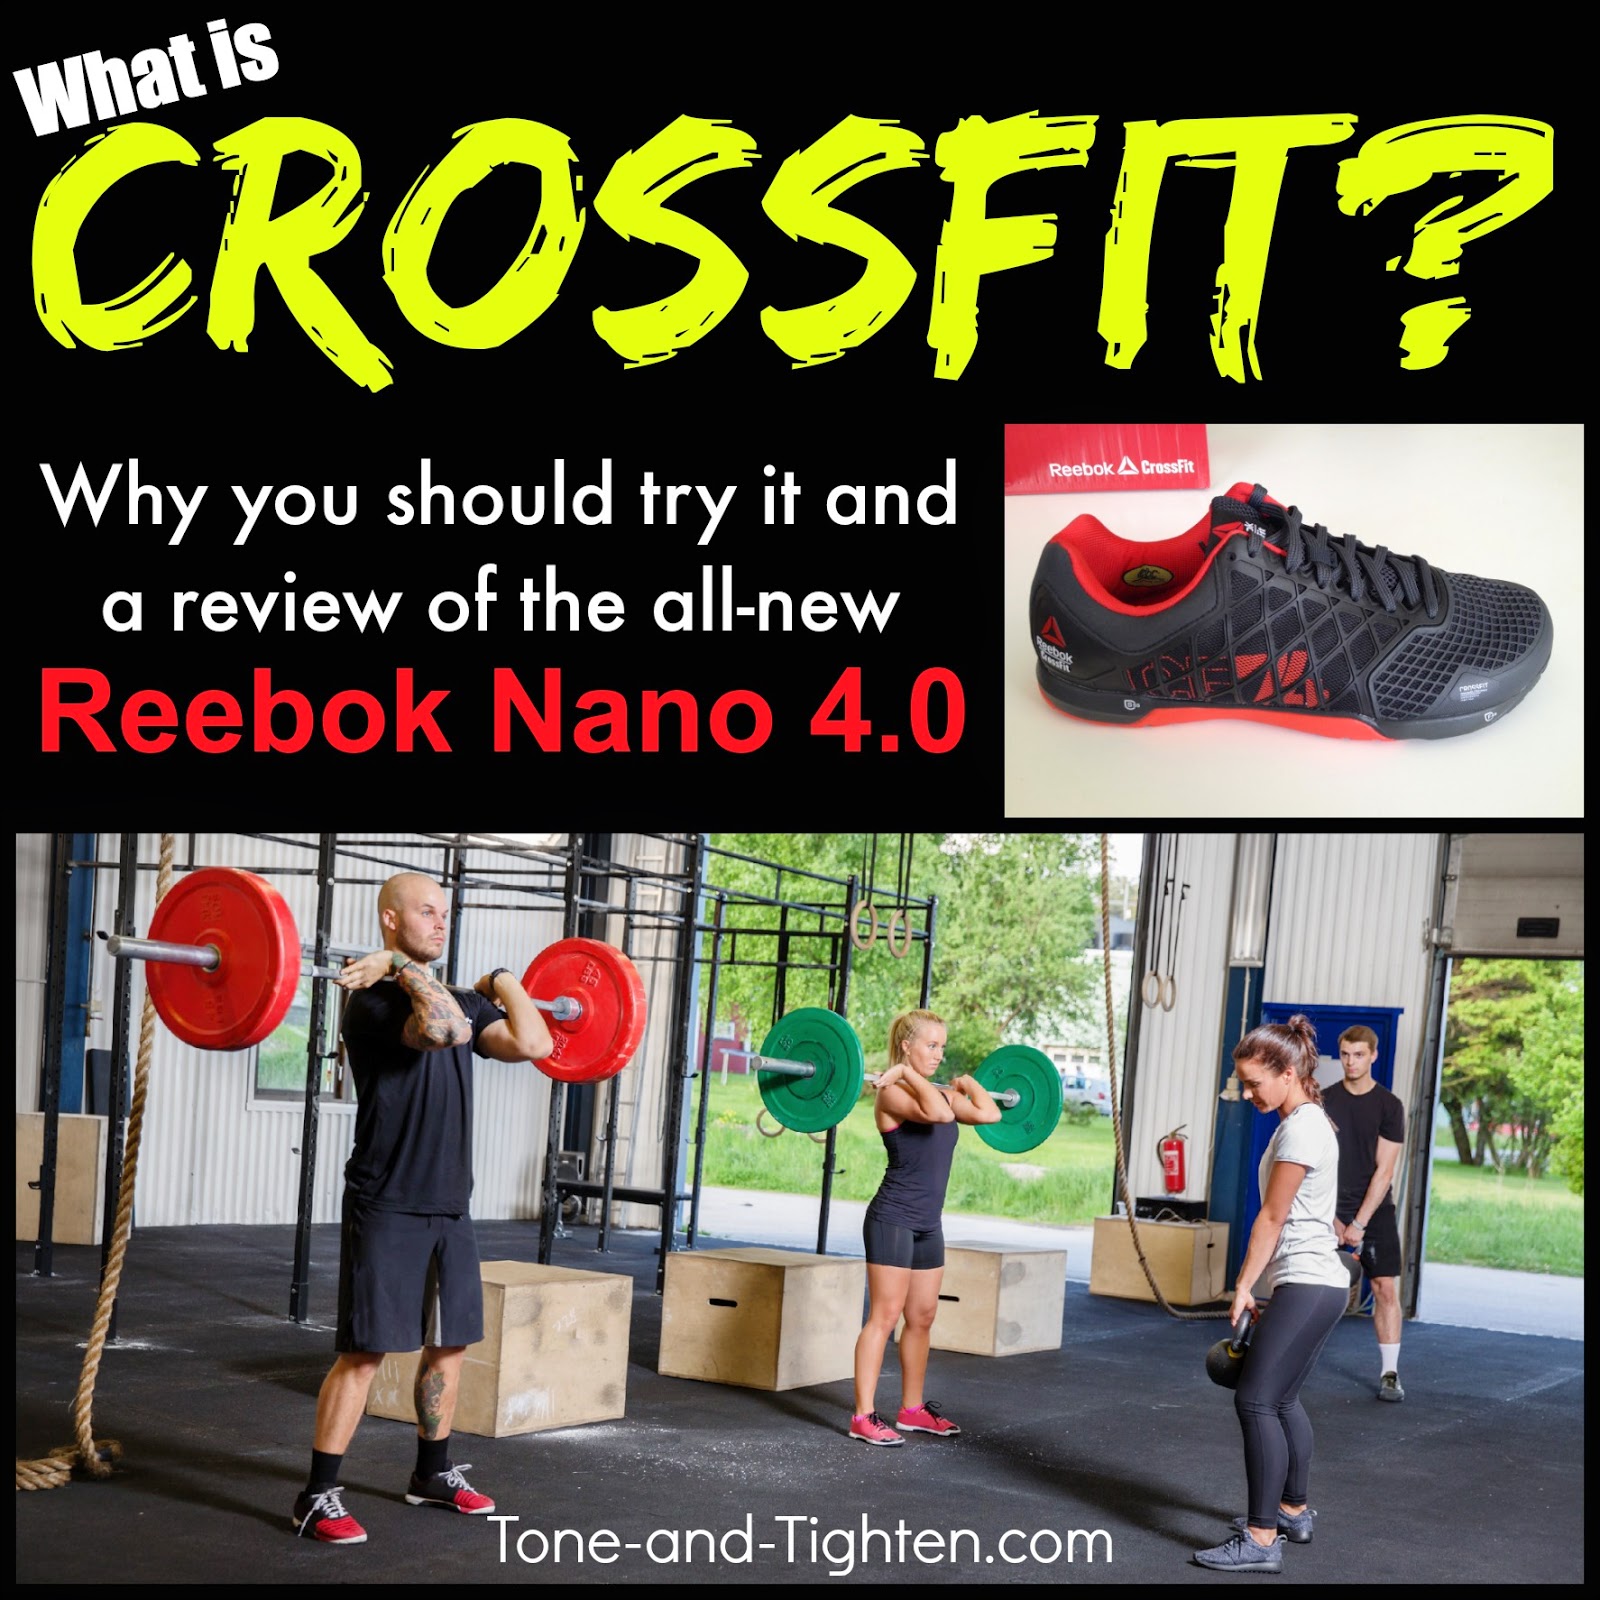 What is CrossFit? Why you need to try it and a review of the Reebok CrossFit Nano 4.0